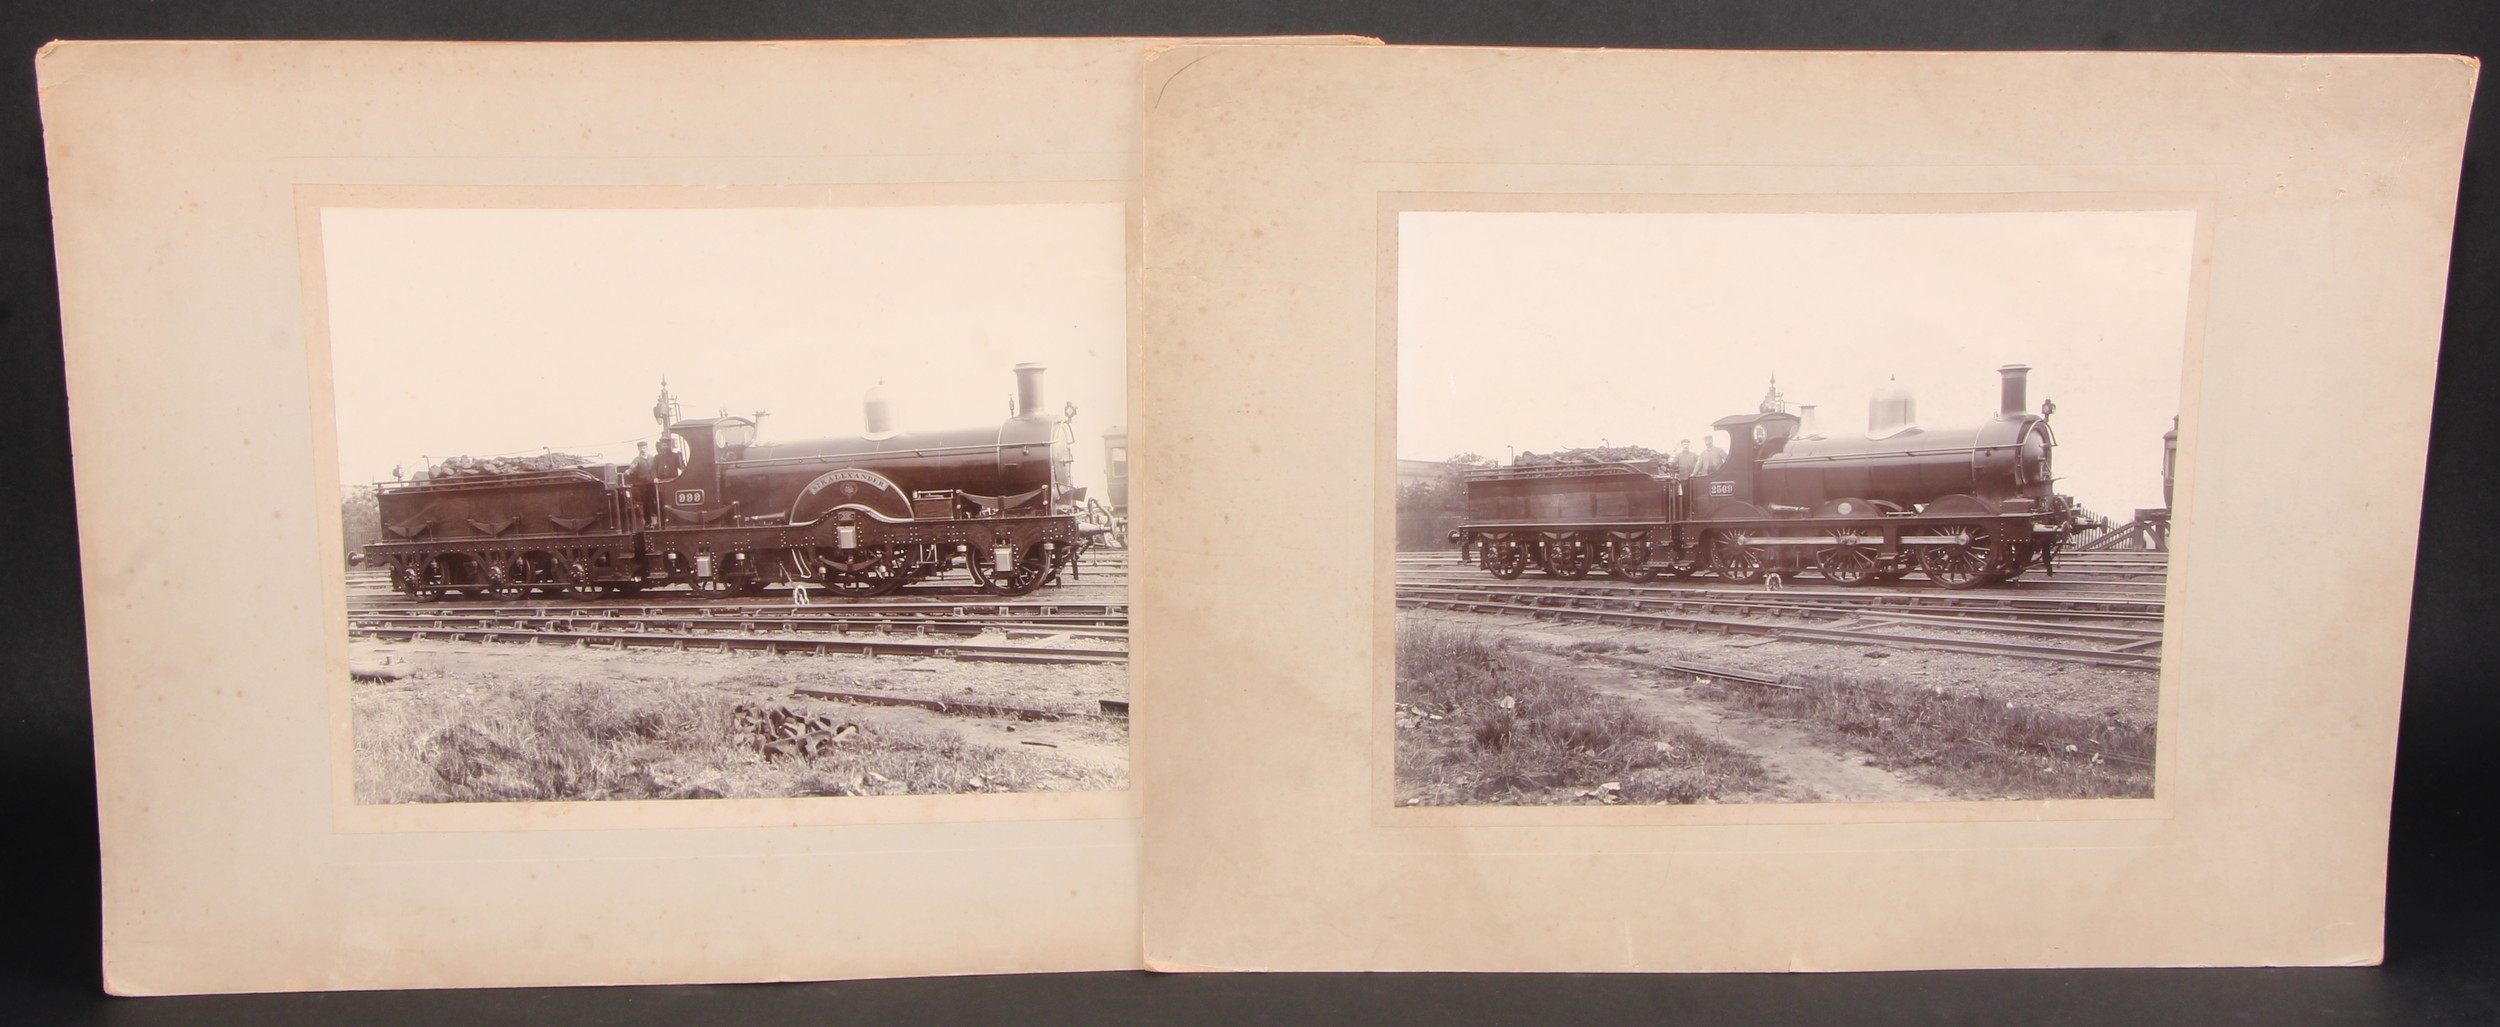 Photography - Railwayana - a collection of 19th century photographs of railway locomotives, many - Image 2 of 8